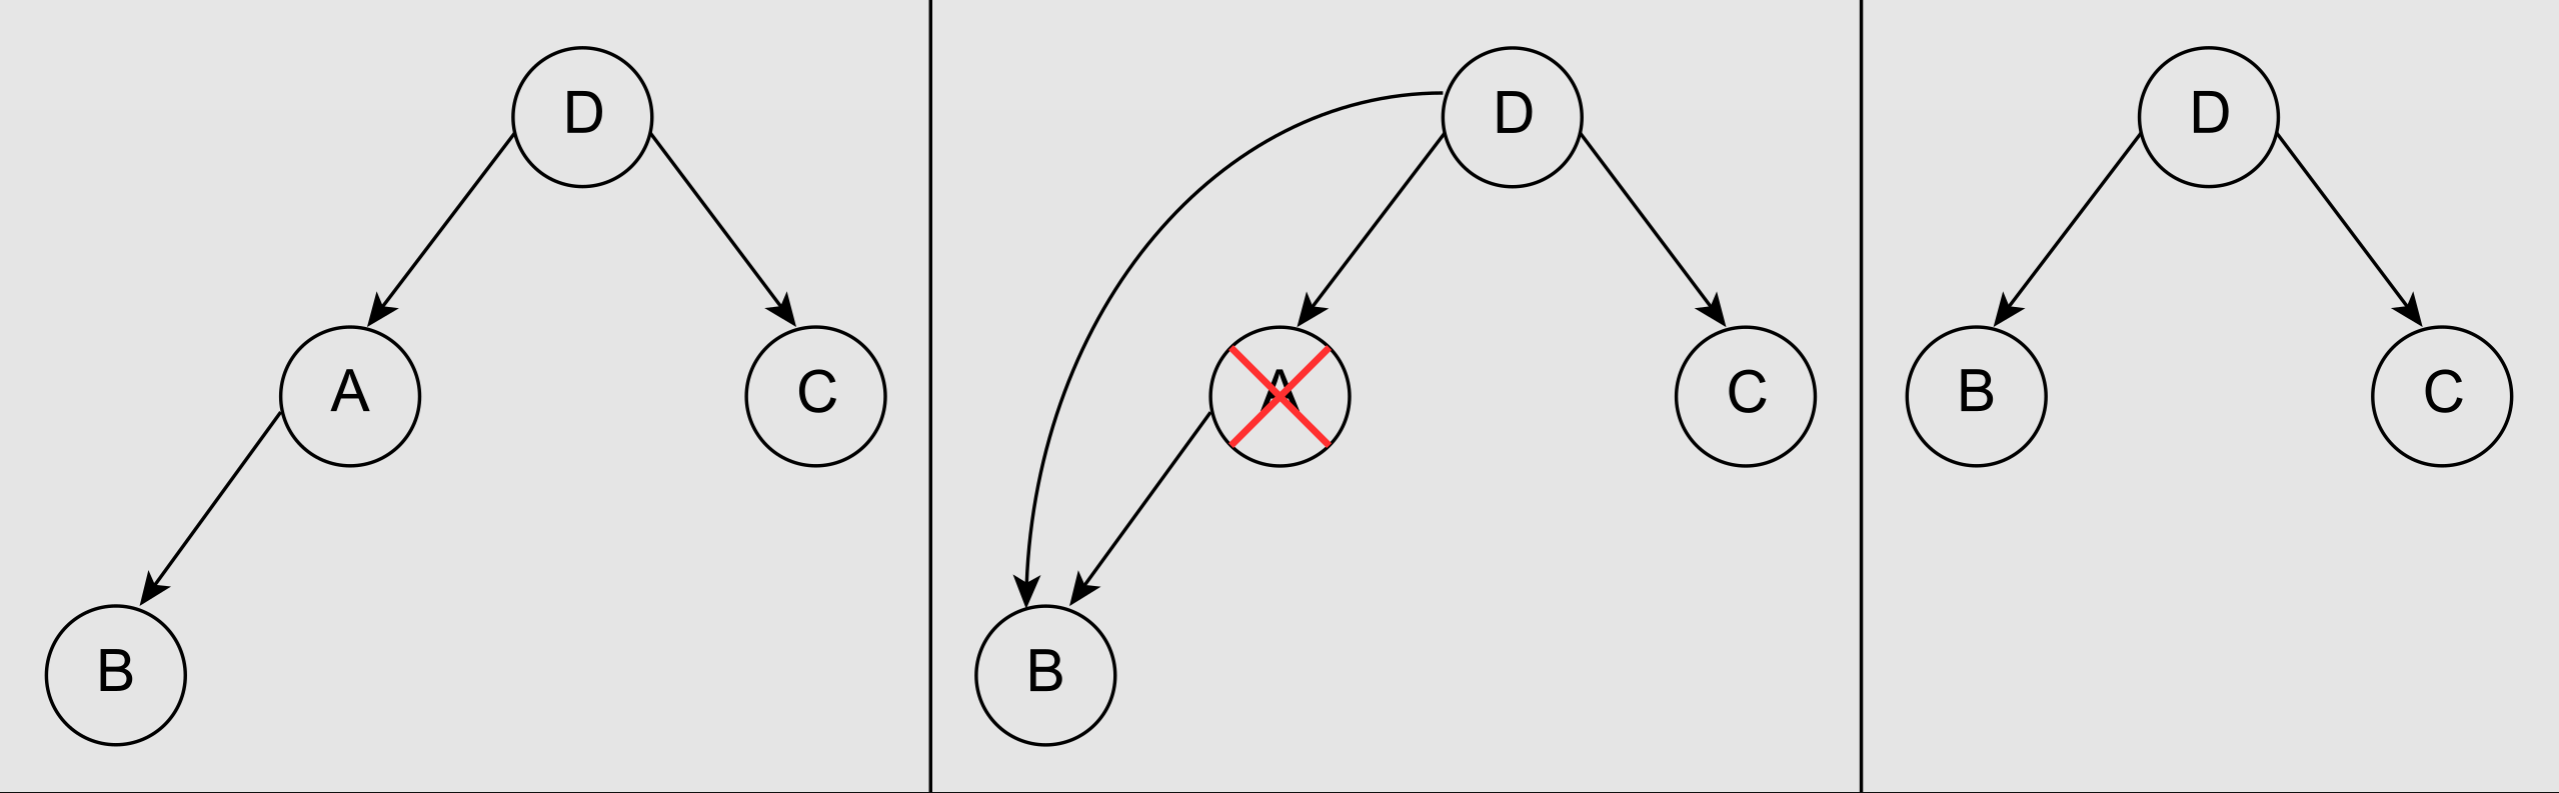 The process of deleting an internal node in a binary tree